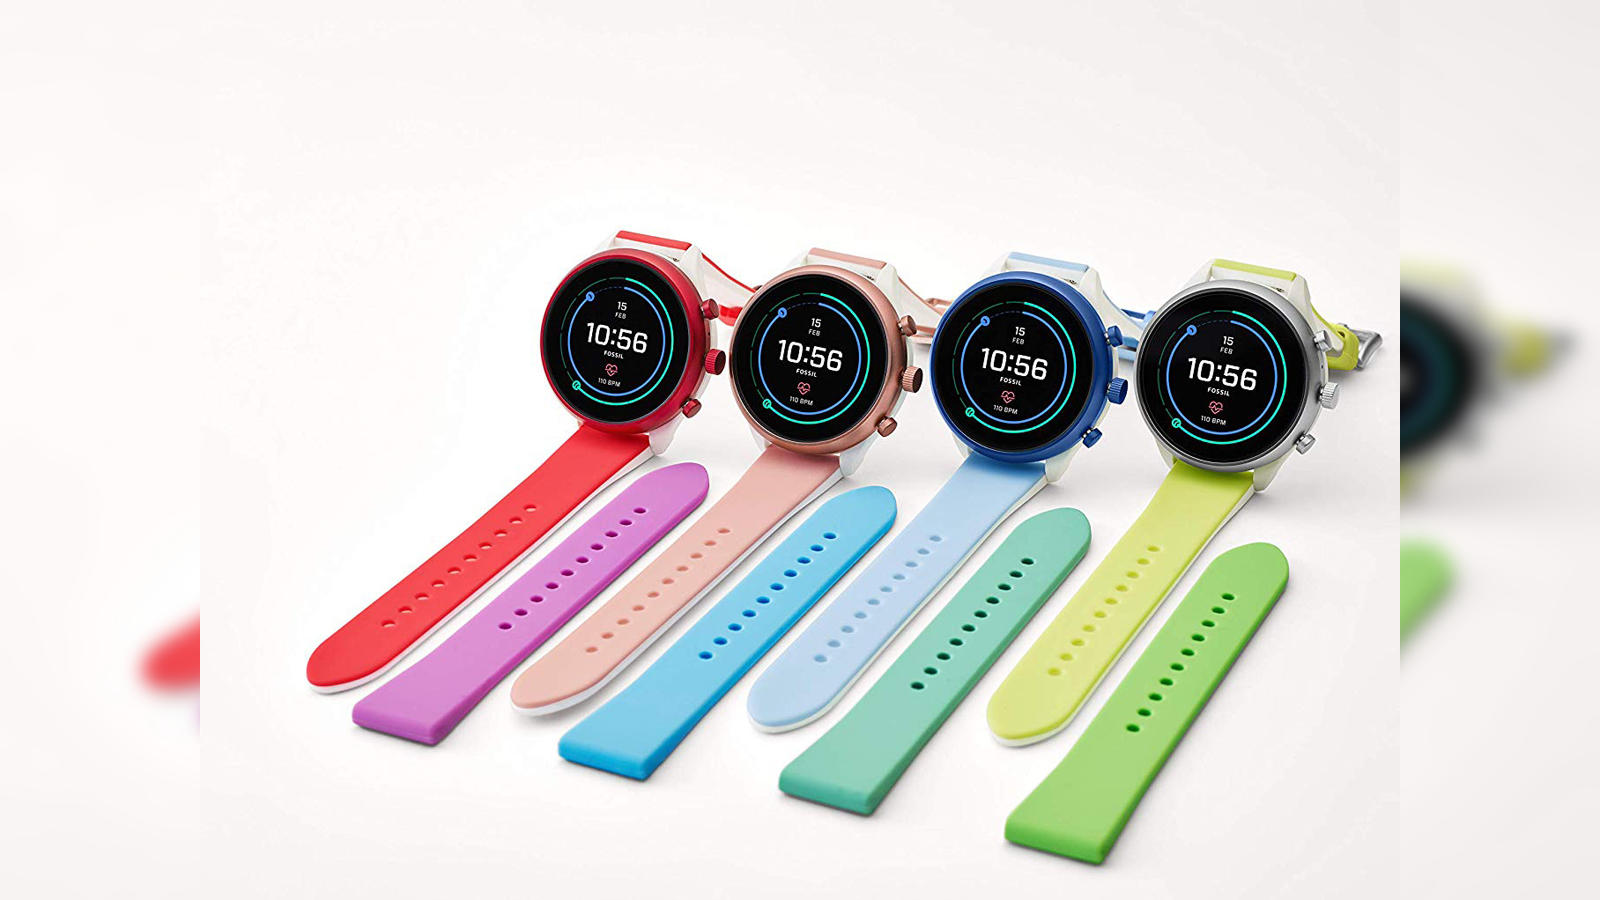 fossil: Fossil Sport review: Classy look & fantastic performance make